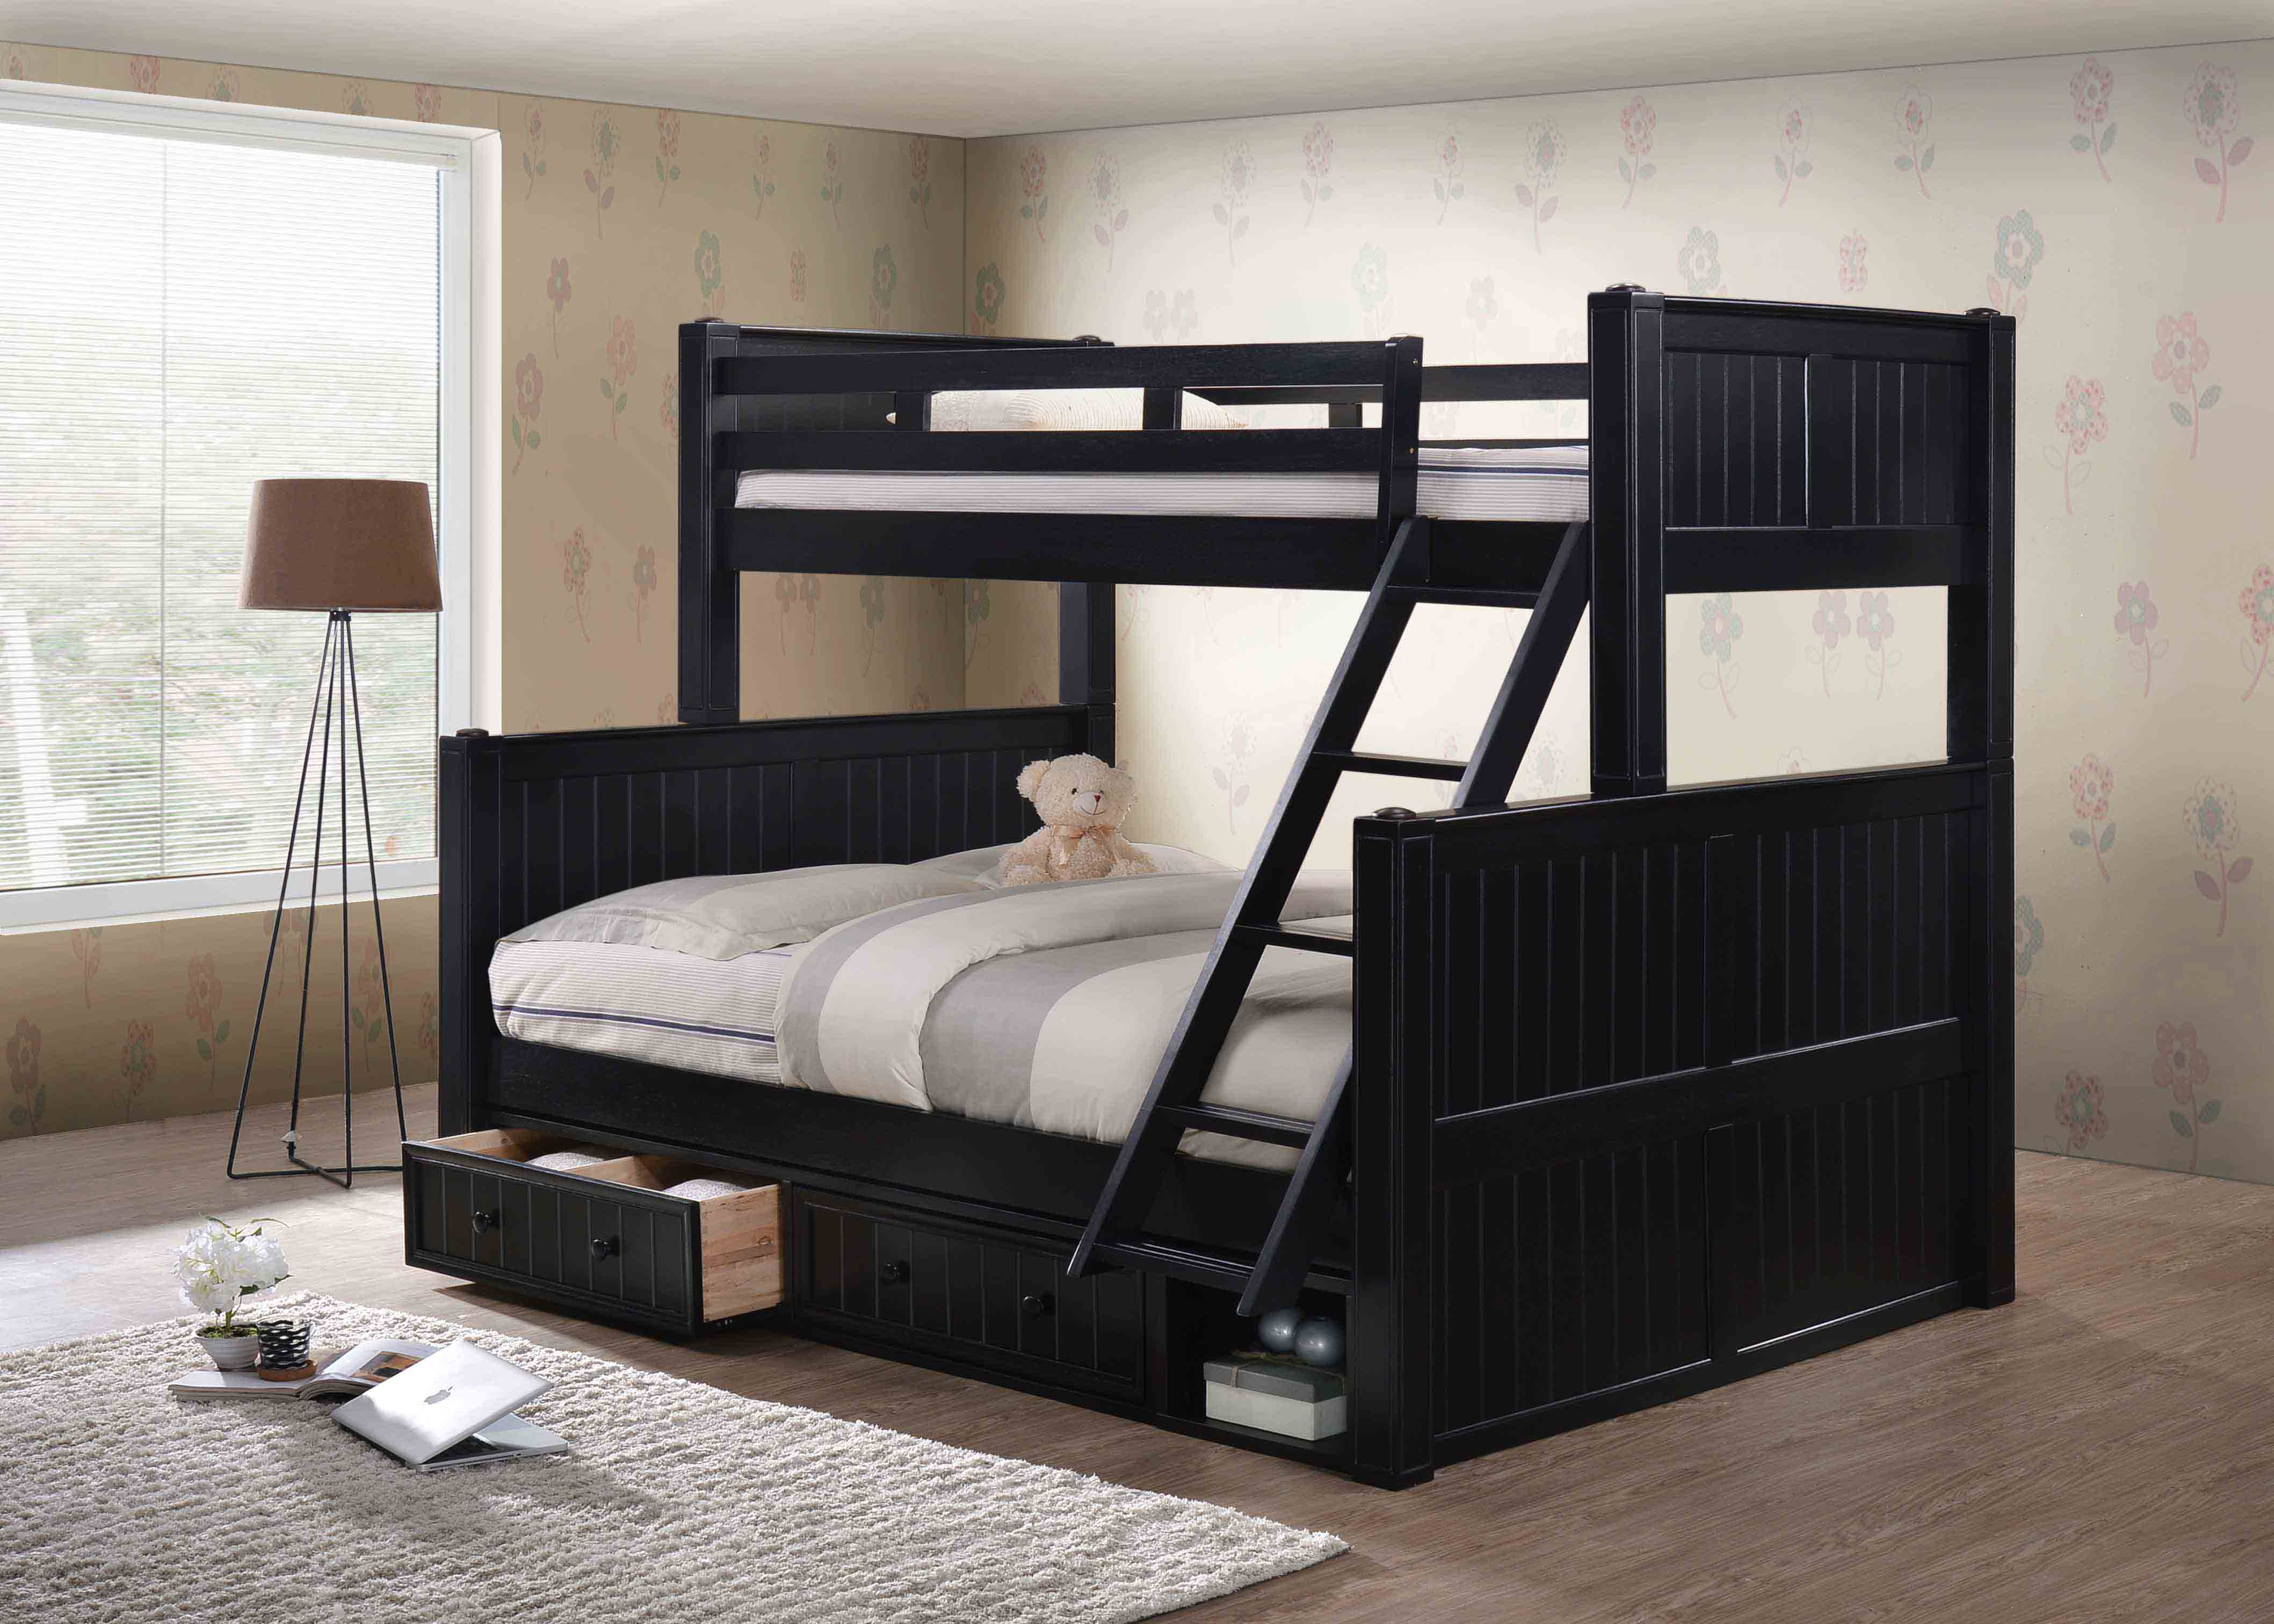 Twin Queen Bunk Bed J A Y Furniture Co, Jay Furniture Bunk Beds